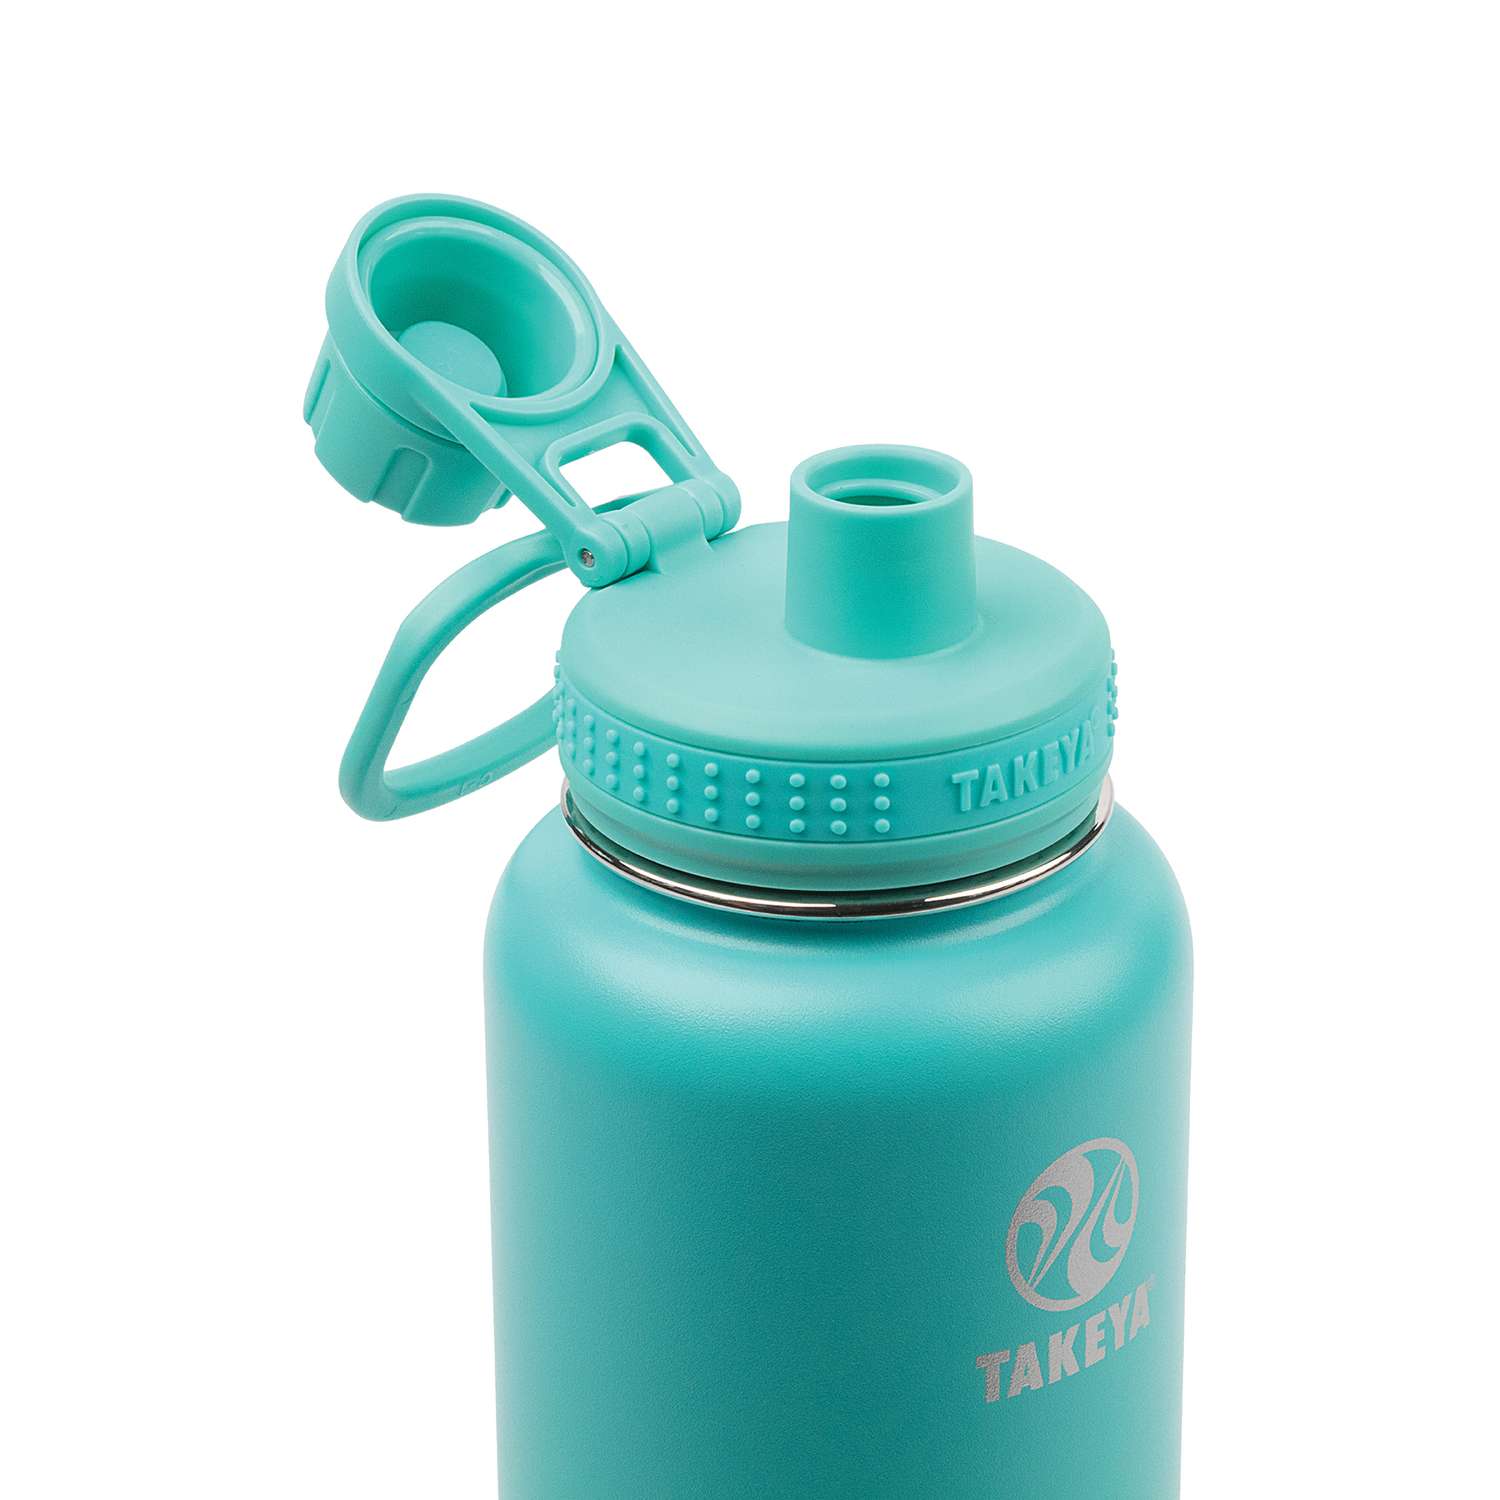 Takeya Actives Insulated Stainless Steel Water Bottle, Teal, 32 oz